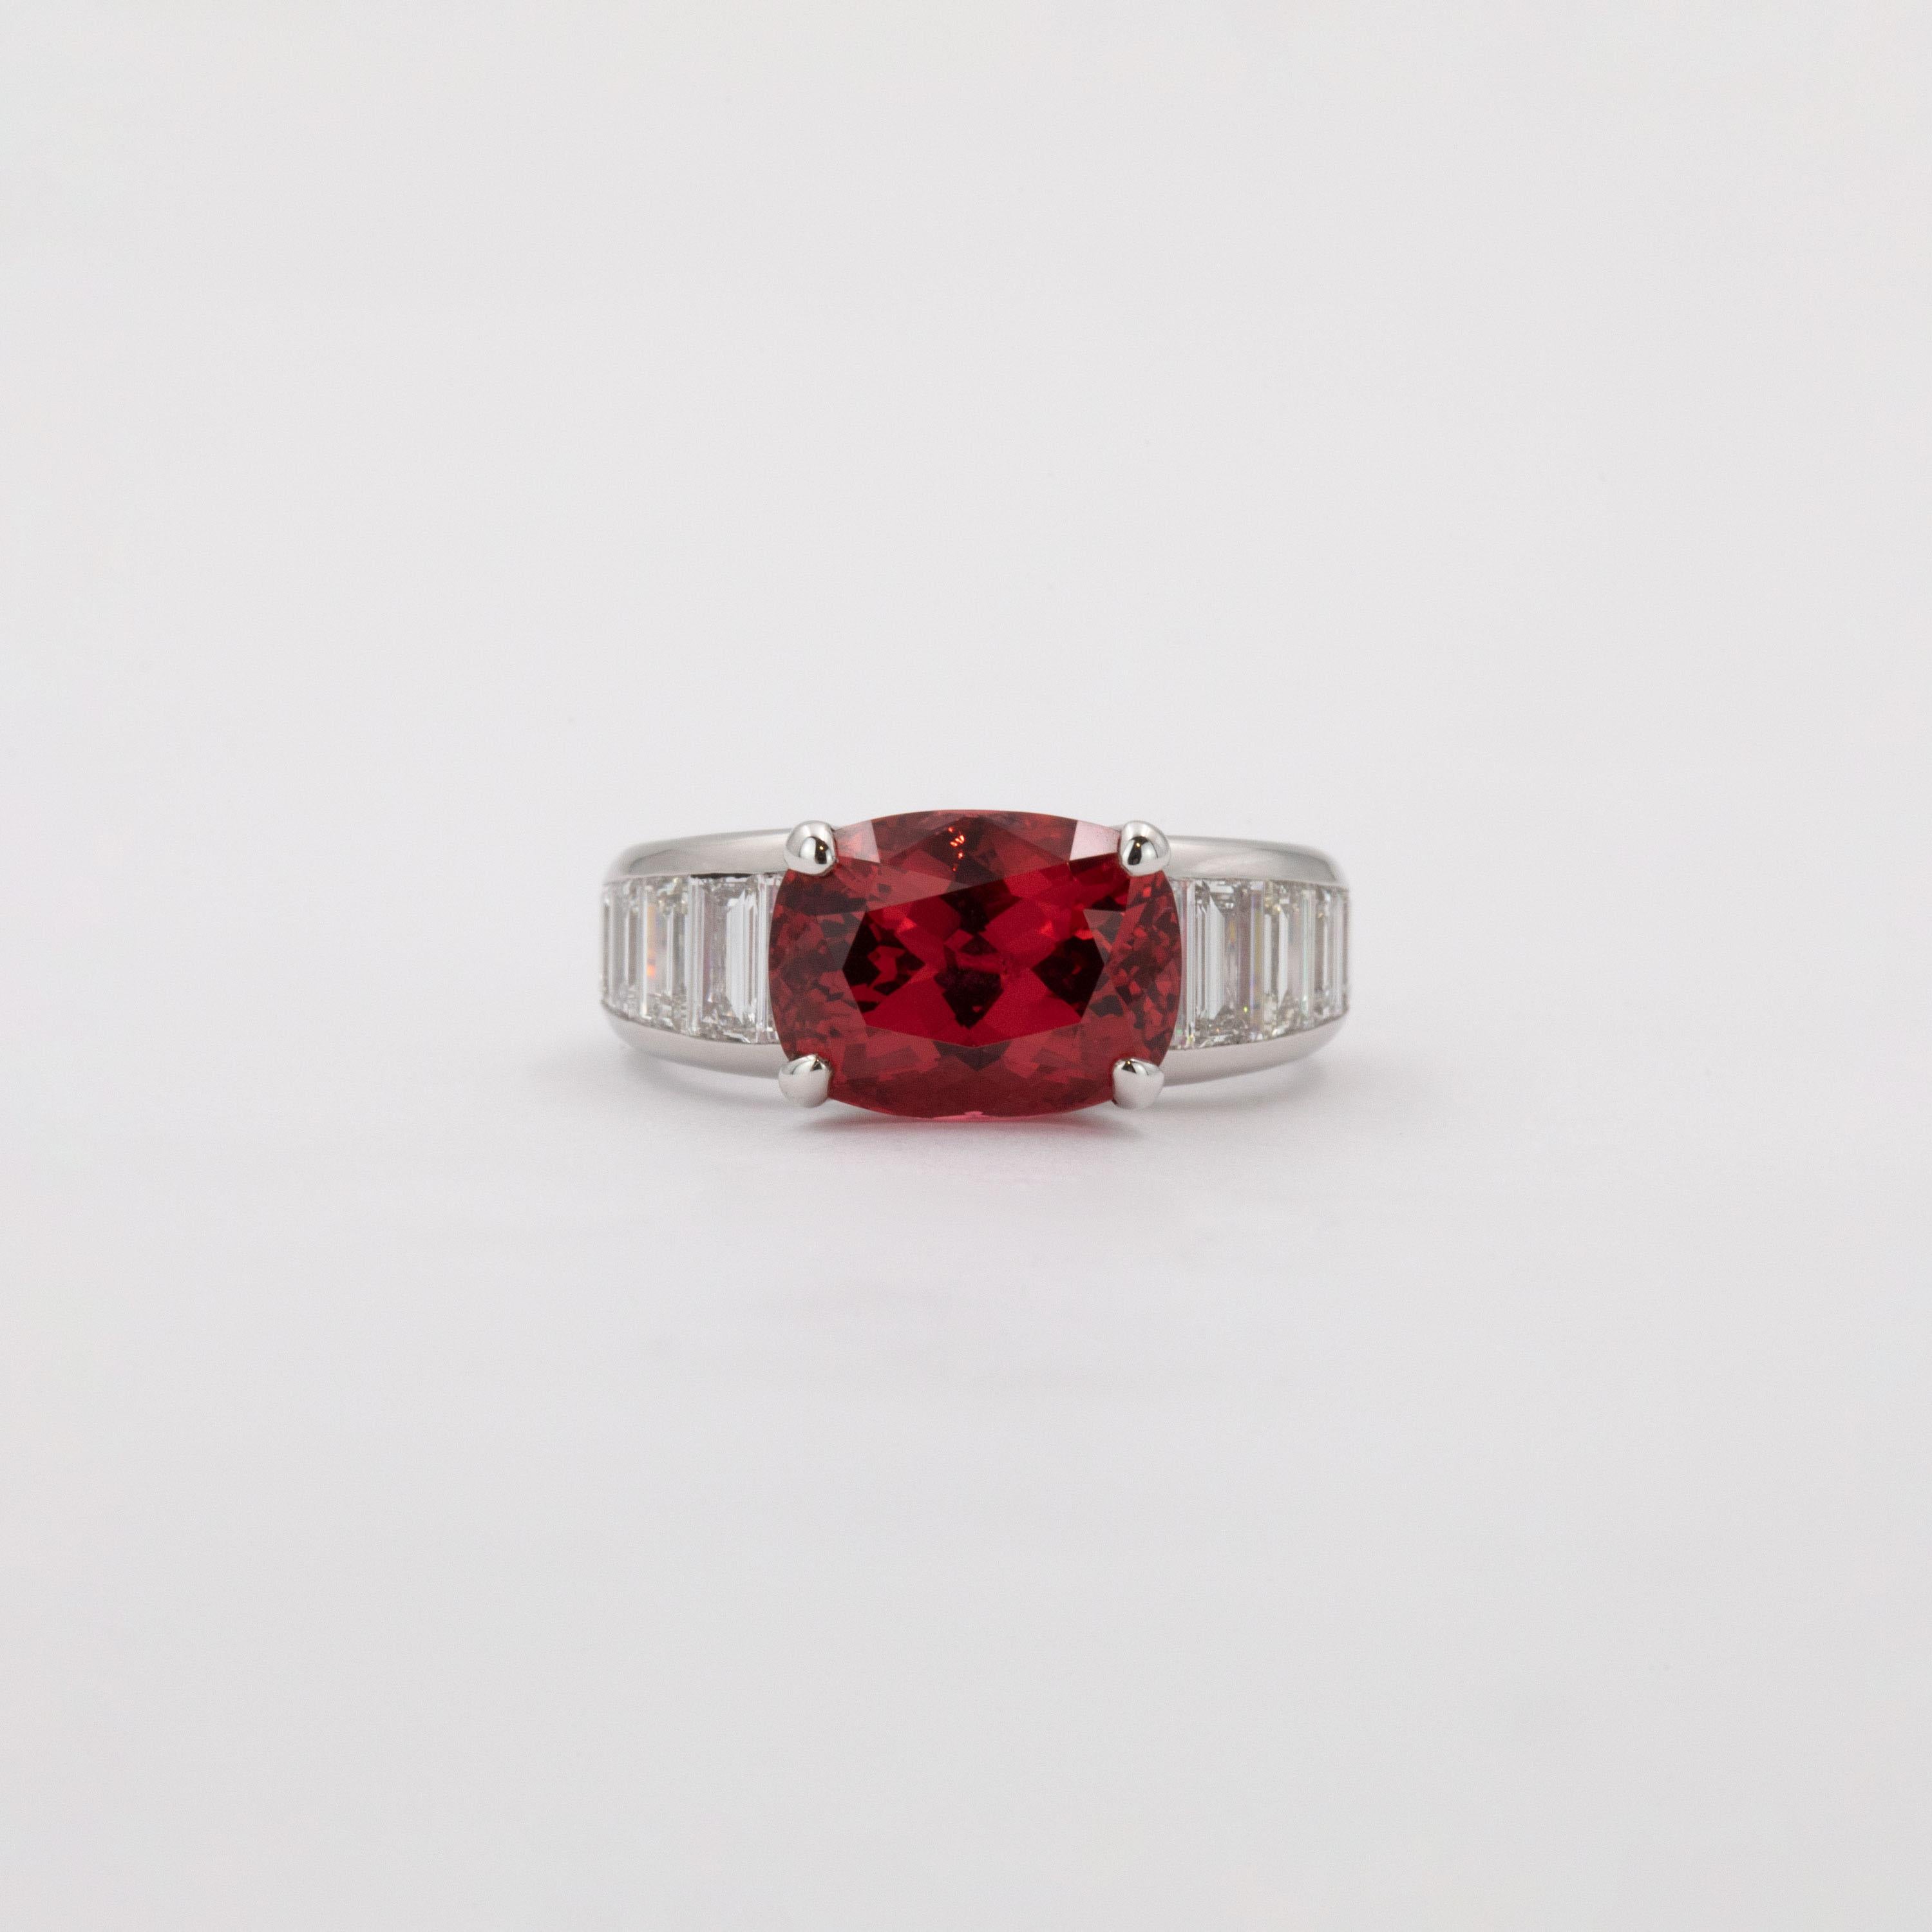 Contemporary GRS Certified 5.30 Carat Neon Reddish-Orange Spinel Ring For Sale